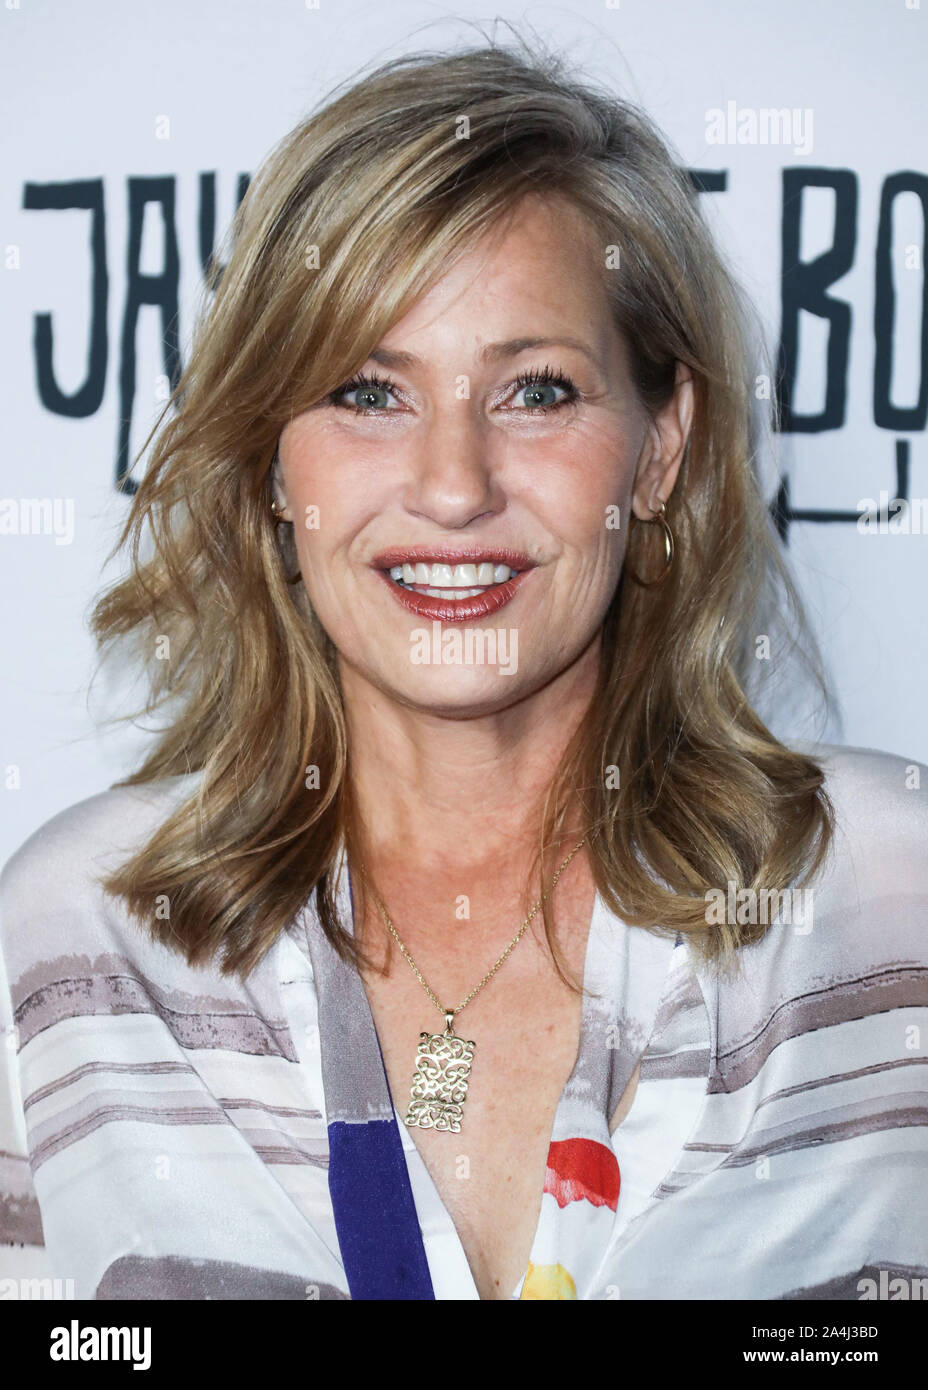 HOLLYWOOD, LOS ANGELES, CALIFORNIA, USA - OCTOBER 14: Actress Joey Lauren Adams arrives at the Los Angeles Premiere Of Saban Films' 'Jay and Silent Bob Reboot' held at the TCL Chinese Theatre IMAX on October 14, 2019 in Hollywood, Los Angeles, California, United States. (Photo by David Acosta/Image Press Agency) Stock Photo